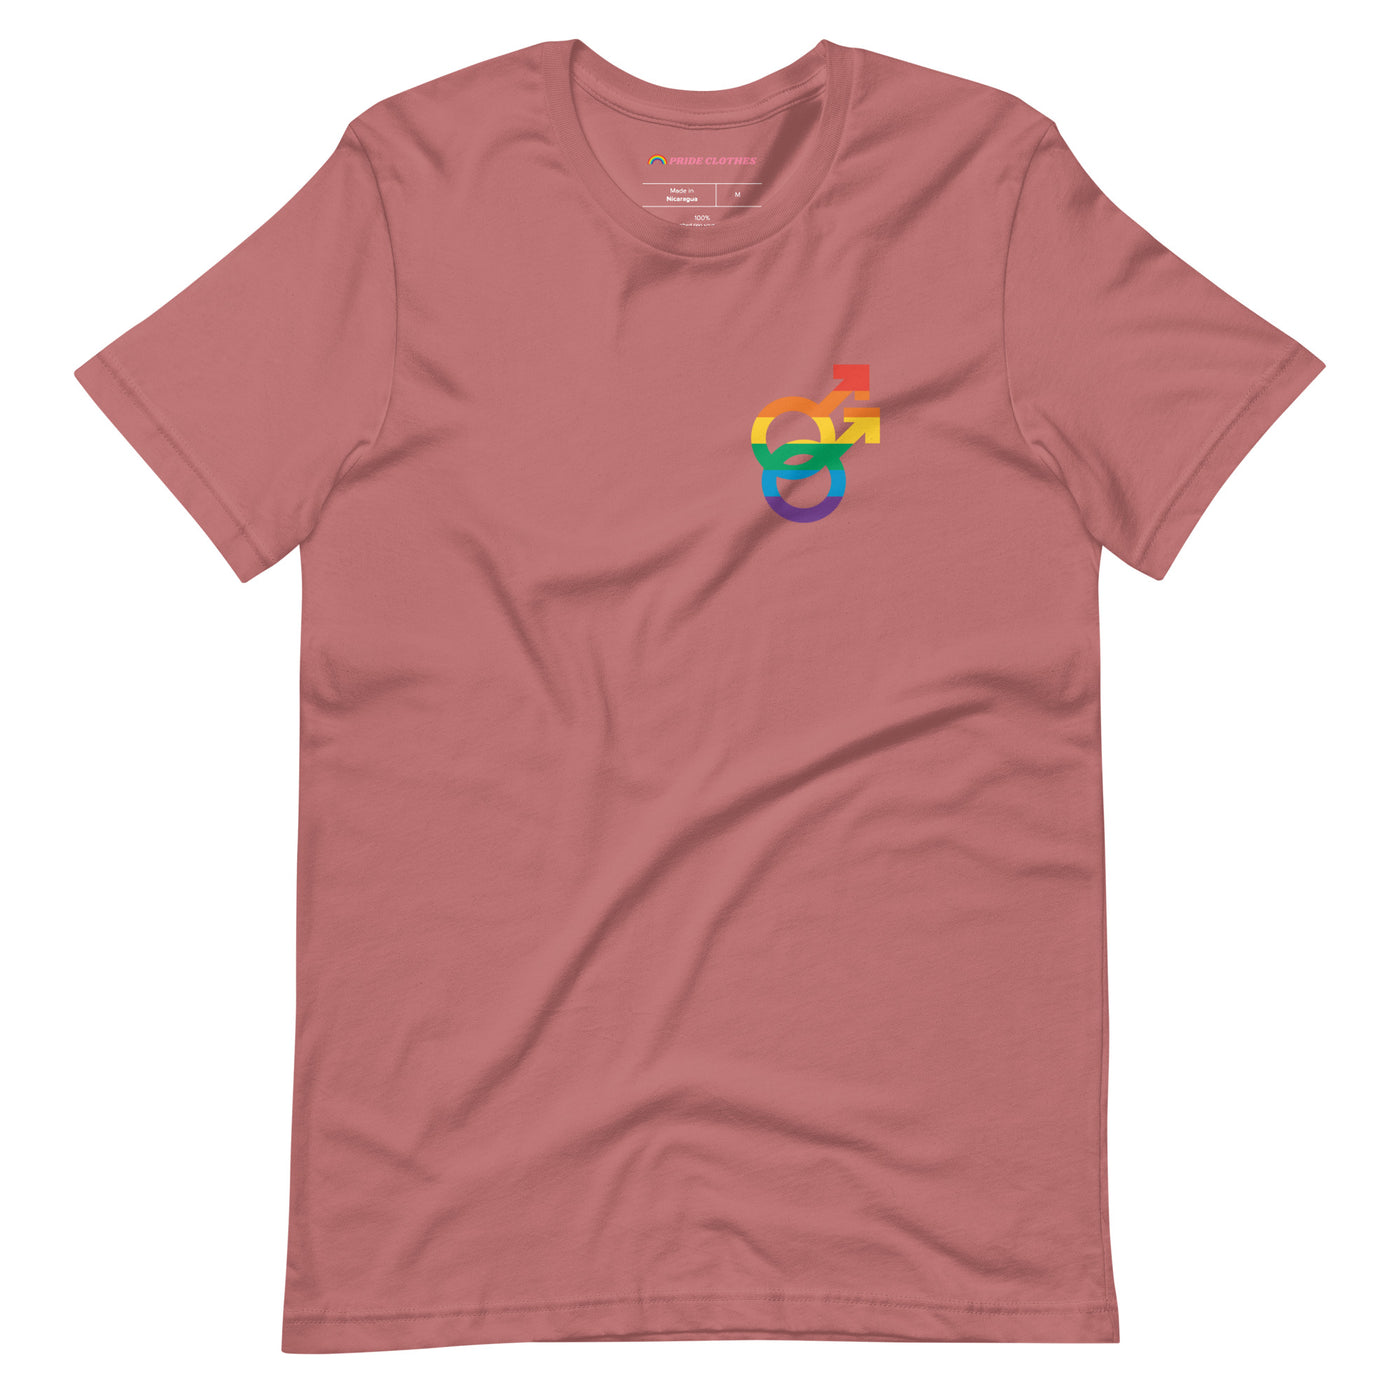 Pride Clothes - Fearlessly Express Your Truth Gay Gender Pride T-Shirt - Mauve